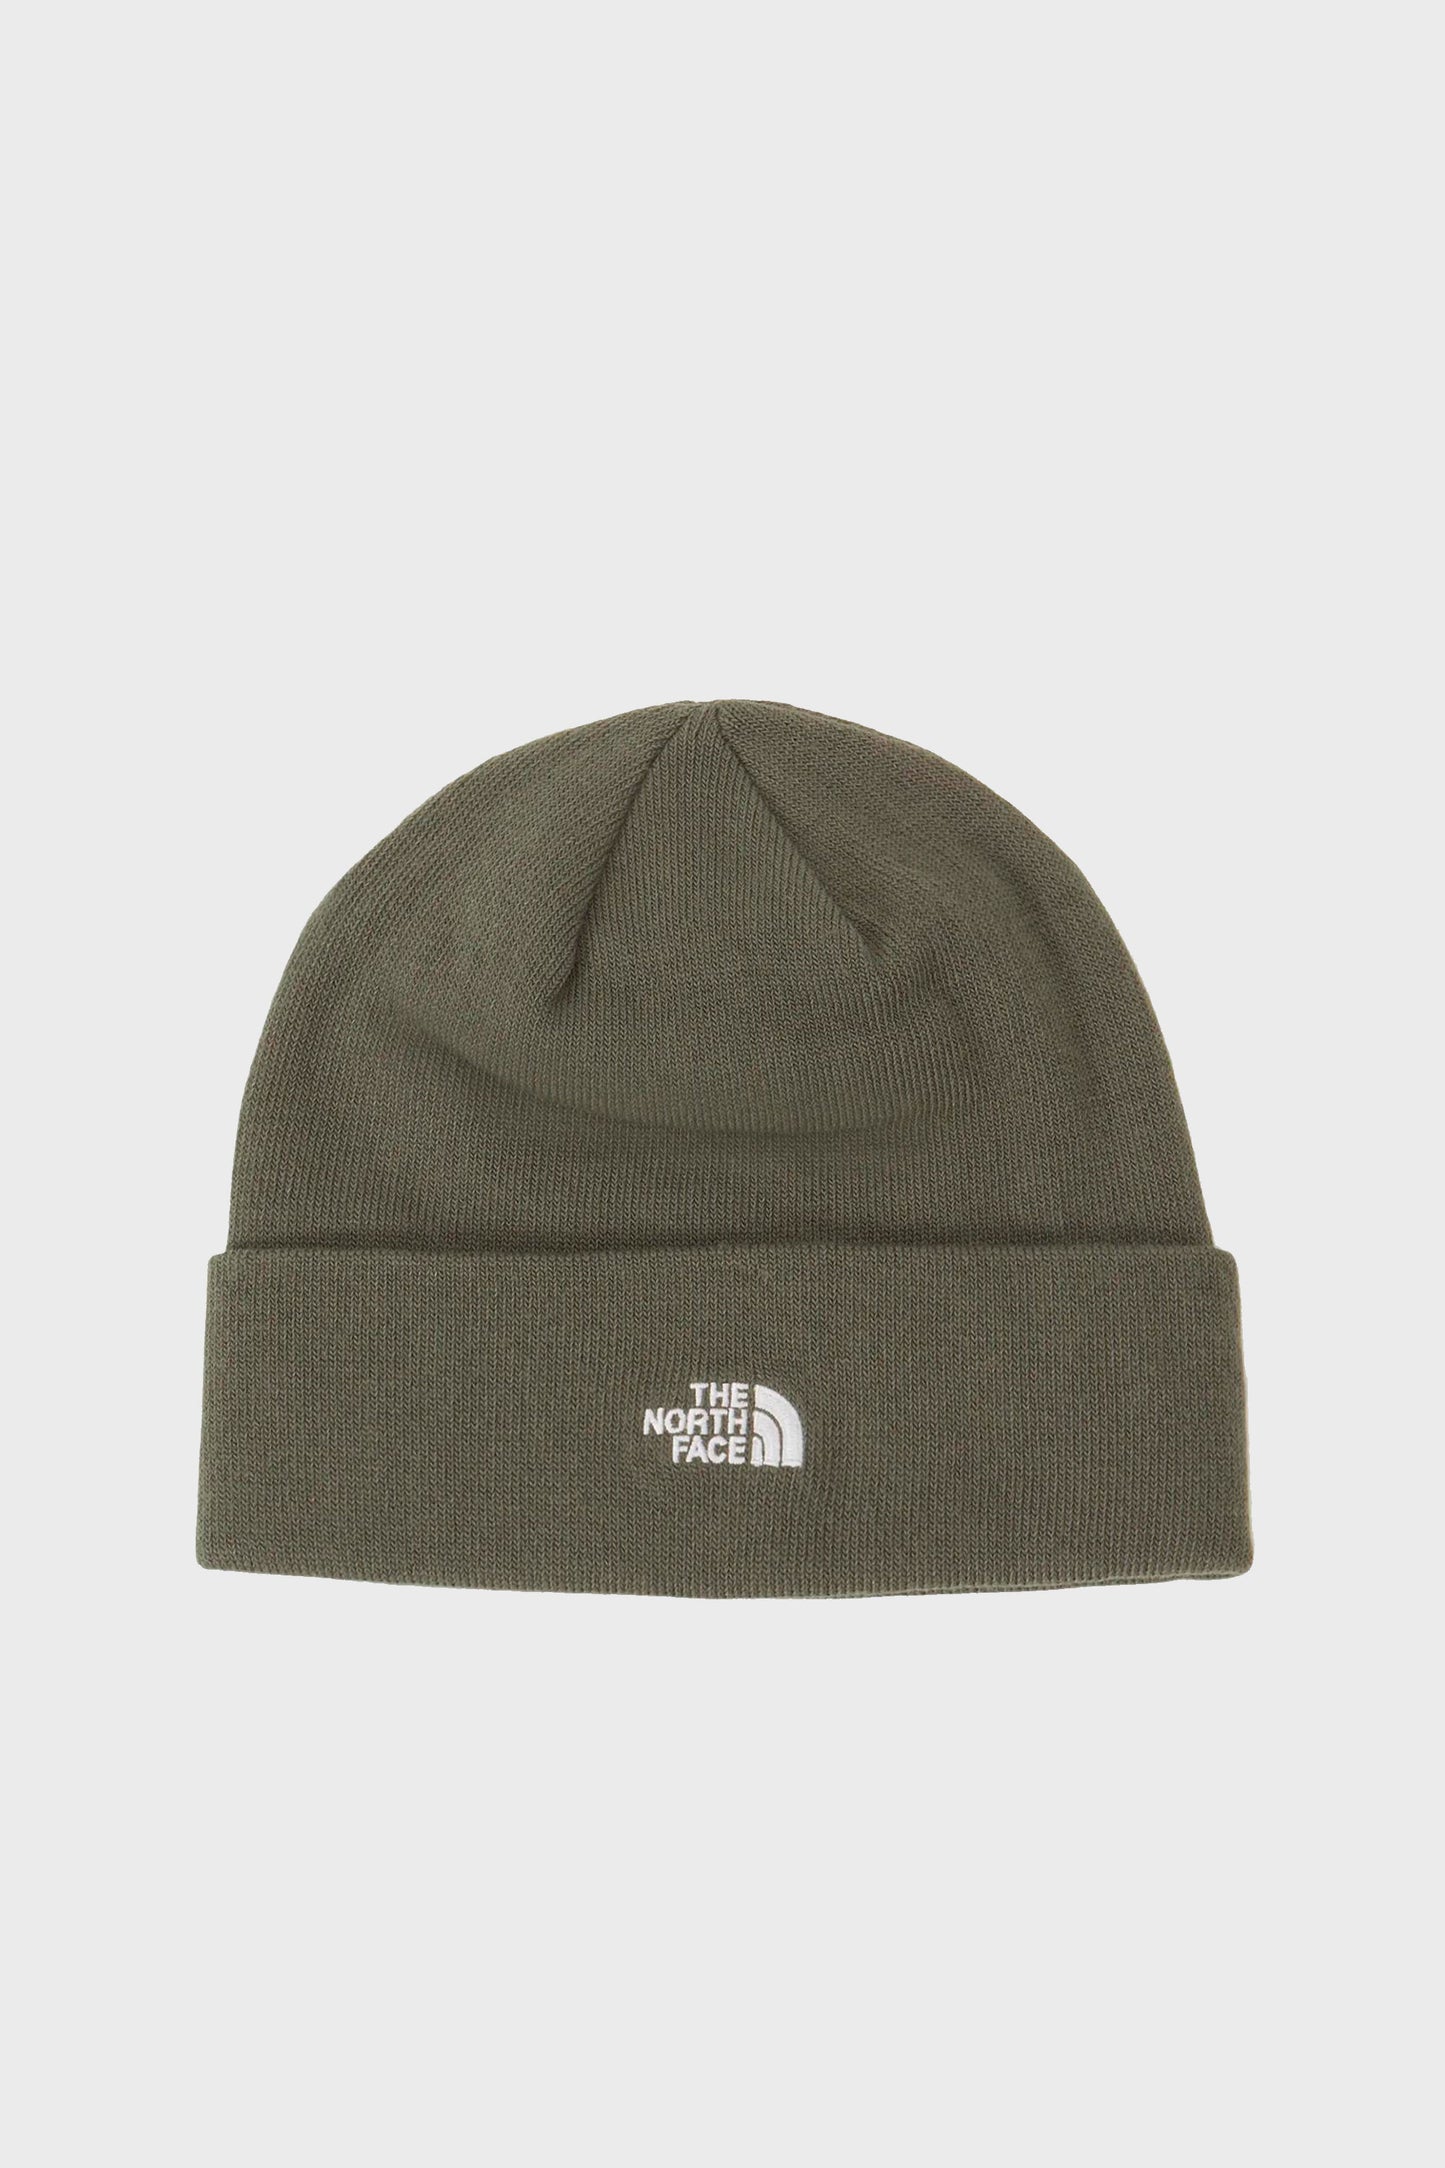 Pukas-Surf-Shop-The-North-Face-beanie-norm-thyme